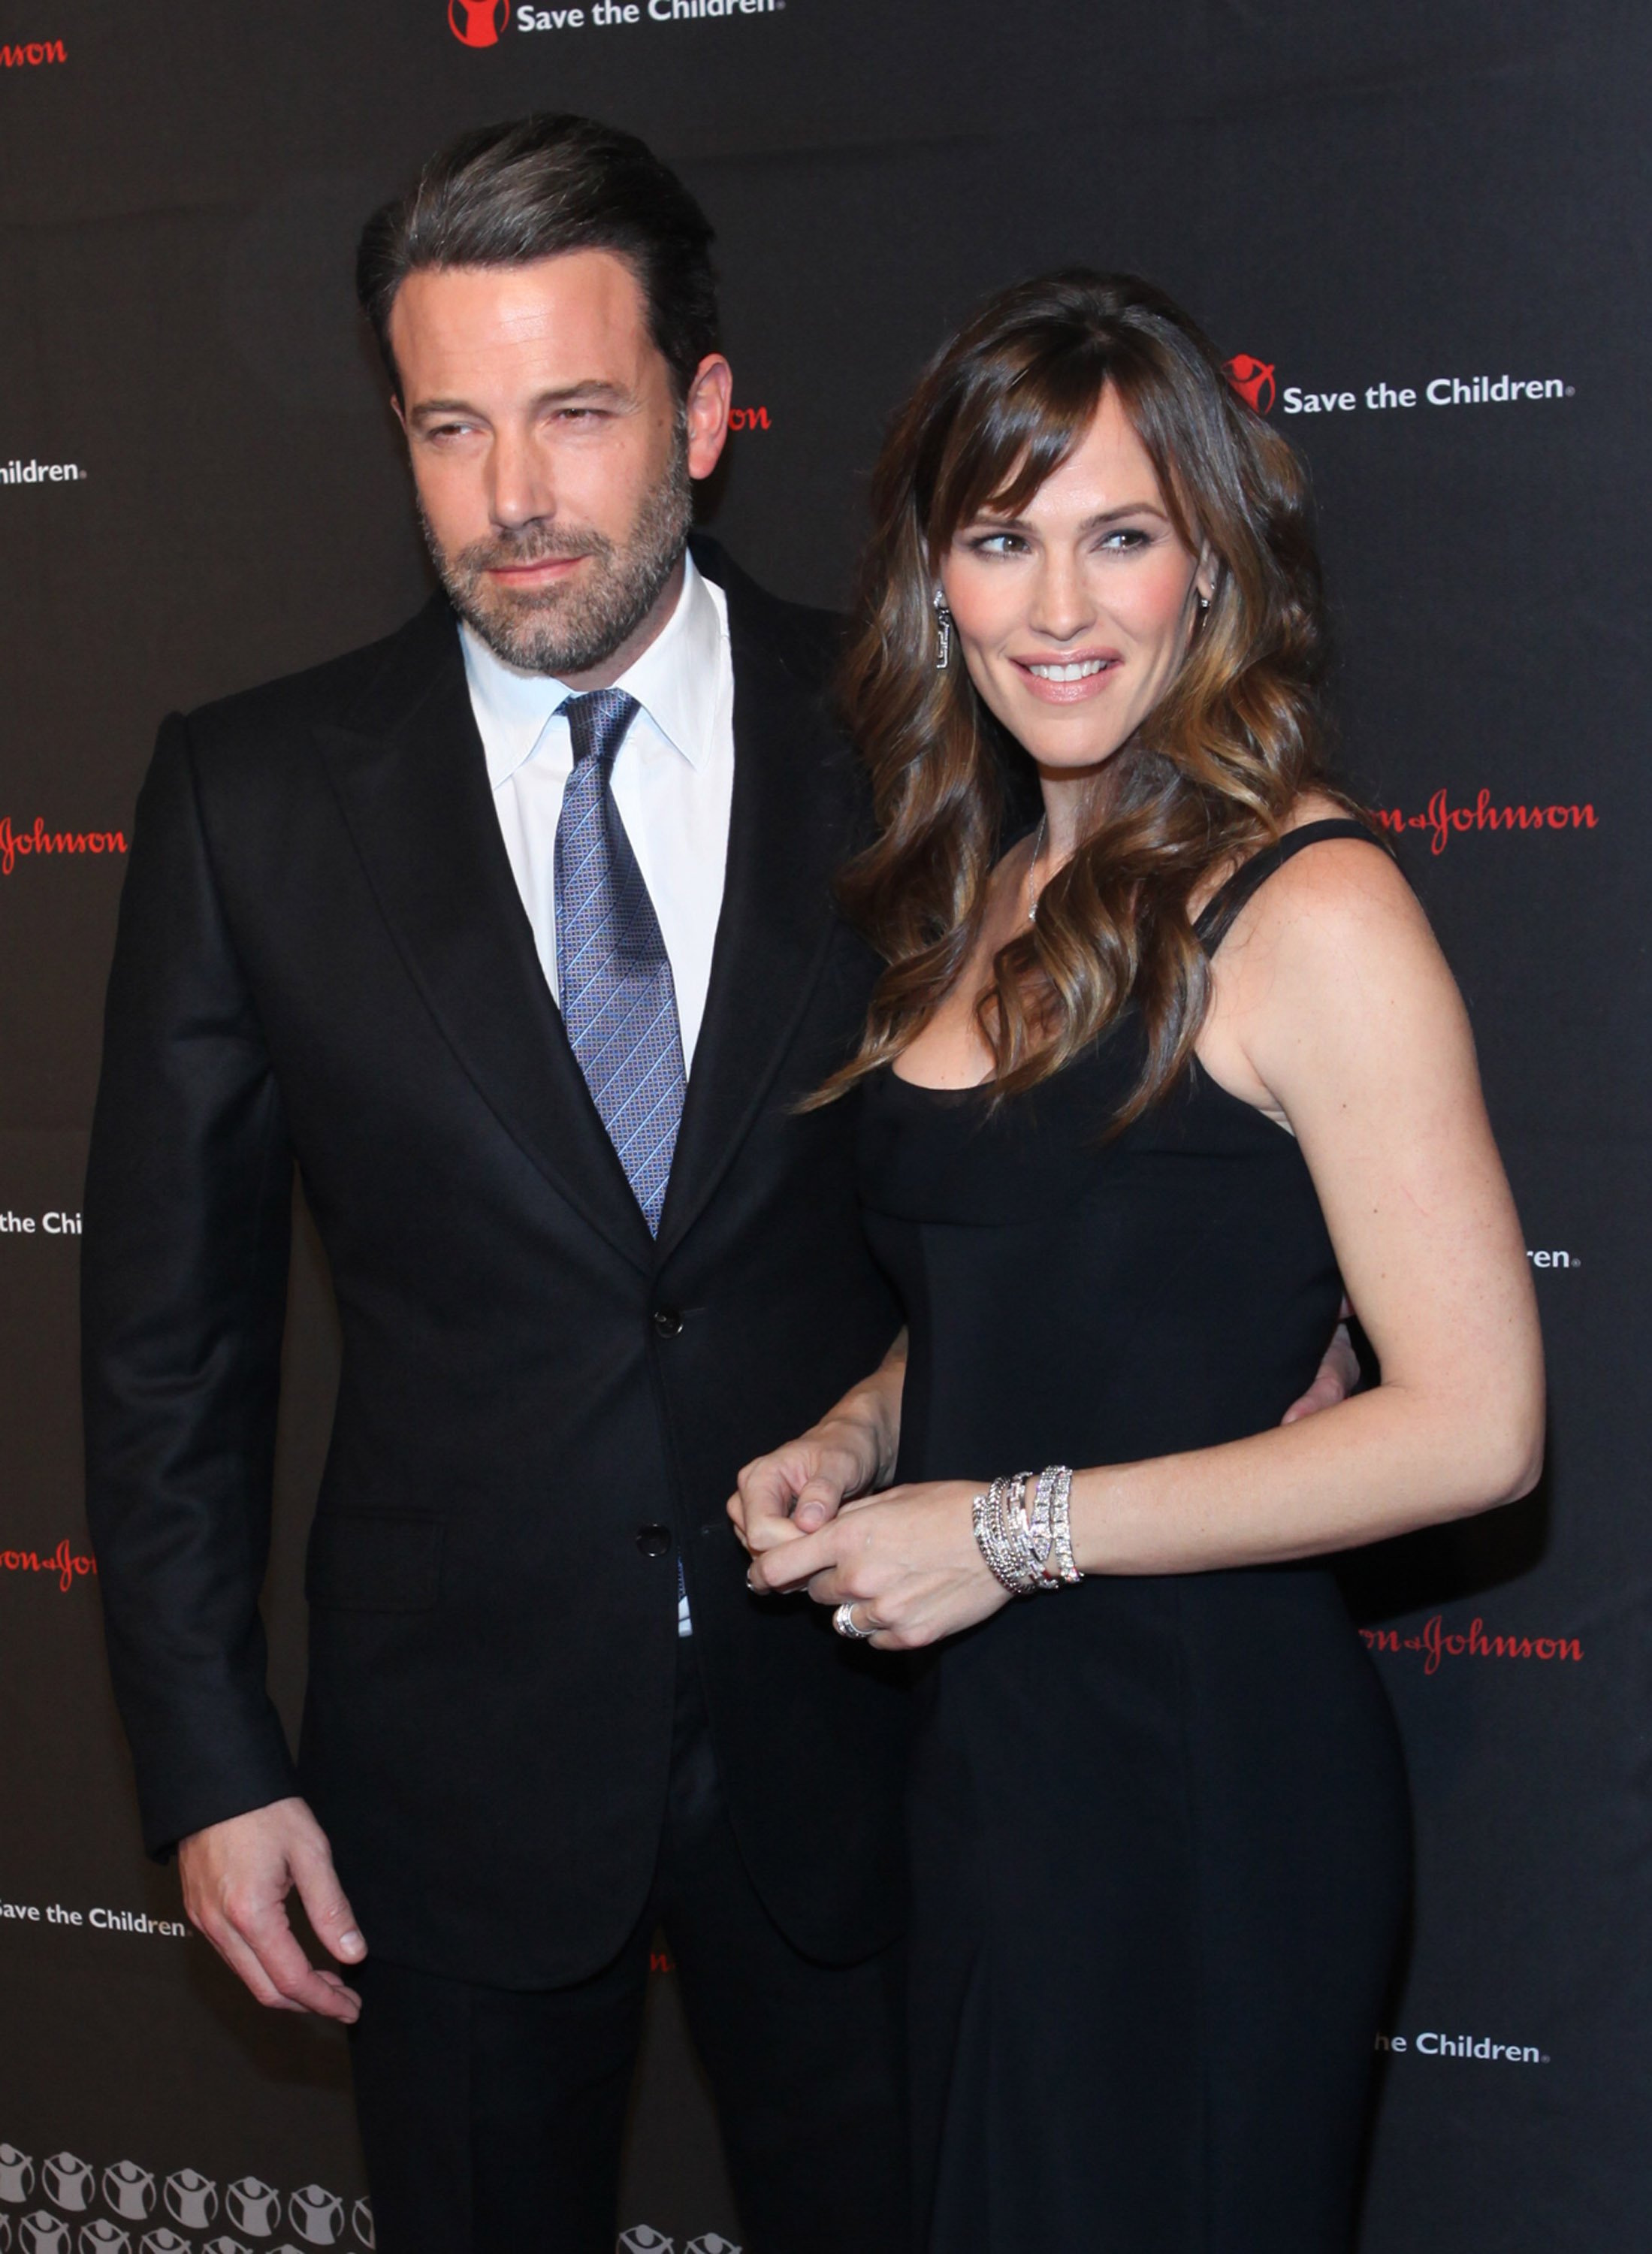 Ben Affleck and Jennifer Garner during 2nd Annual Save the Children Illumination Gala on November 19, 2014 in New York City. | Source: Getty Images